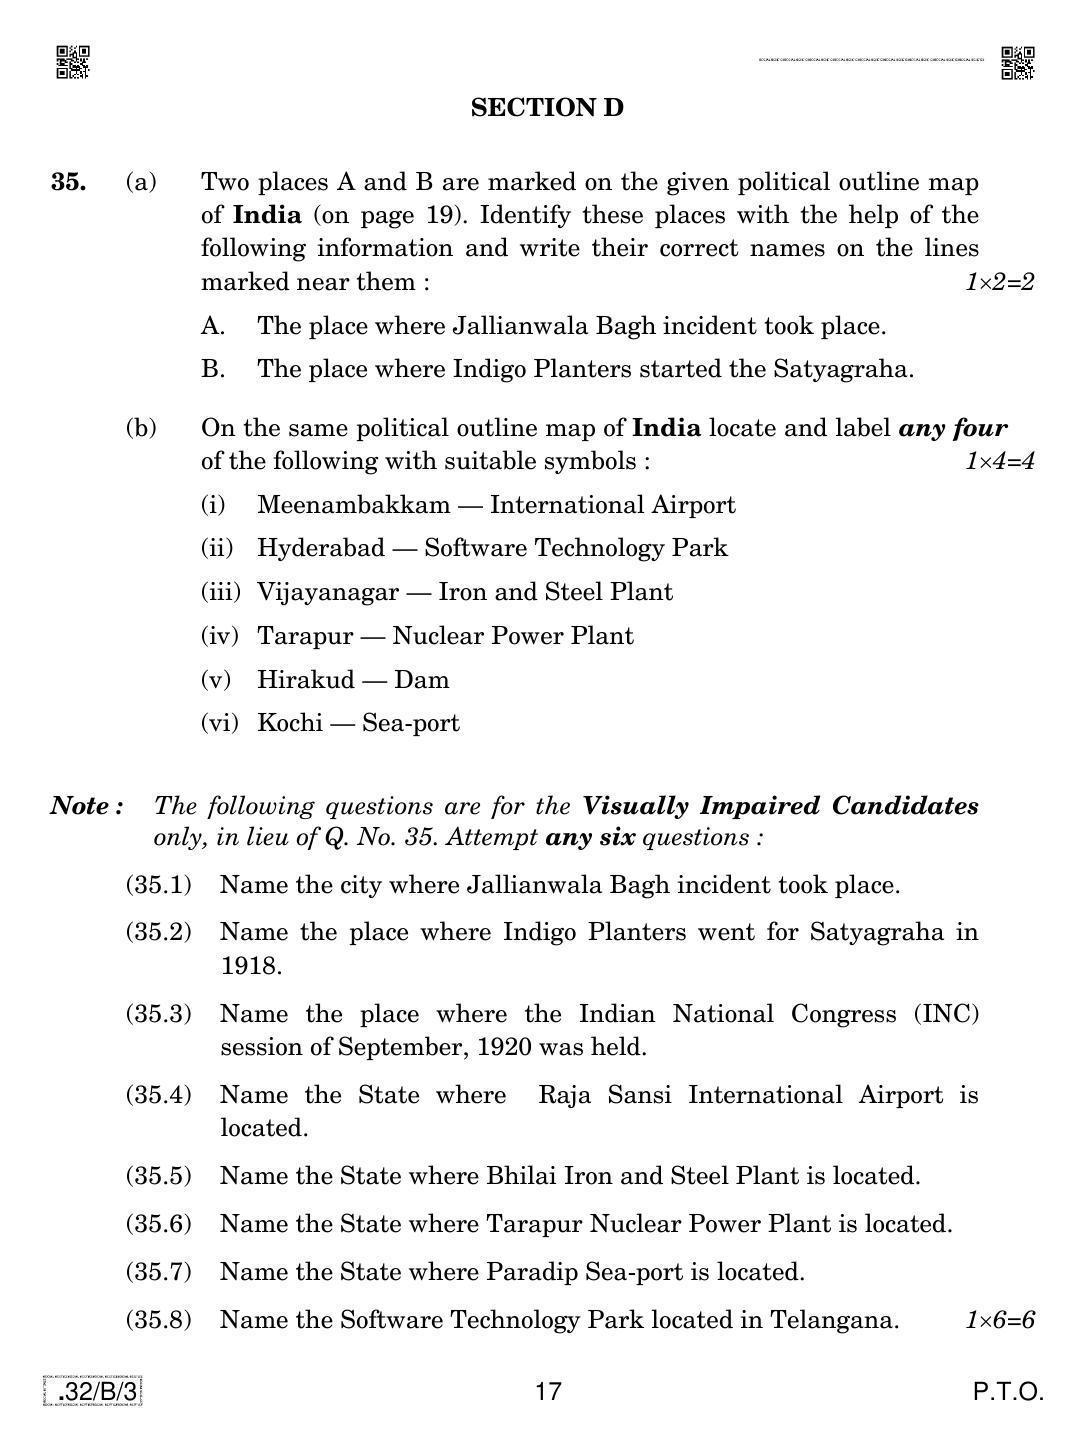 CBSE Class 10 32-C-3 Social Science 2020 Compartment Question Paper - Page 17